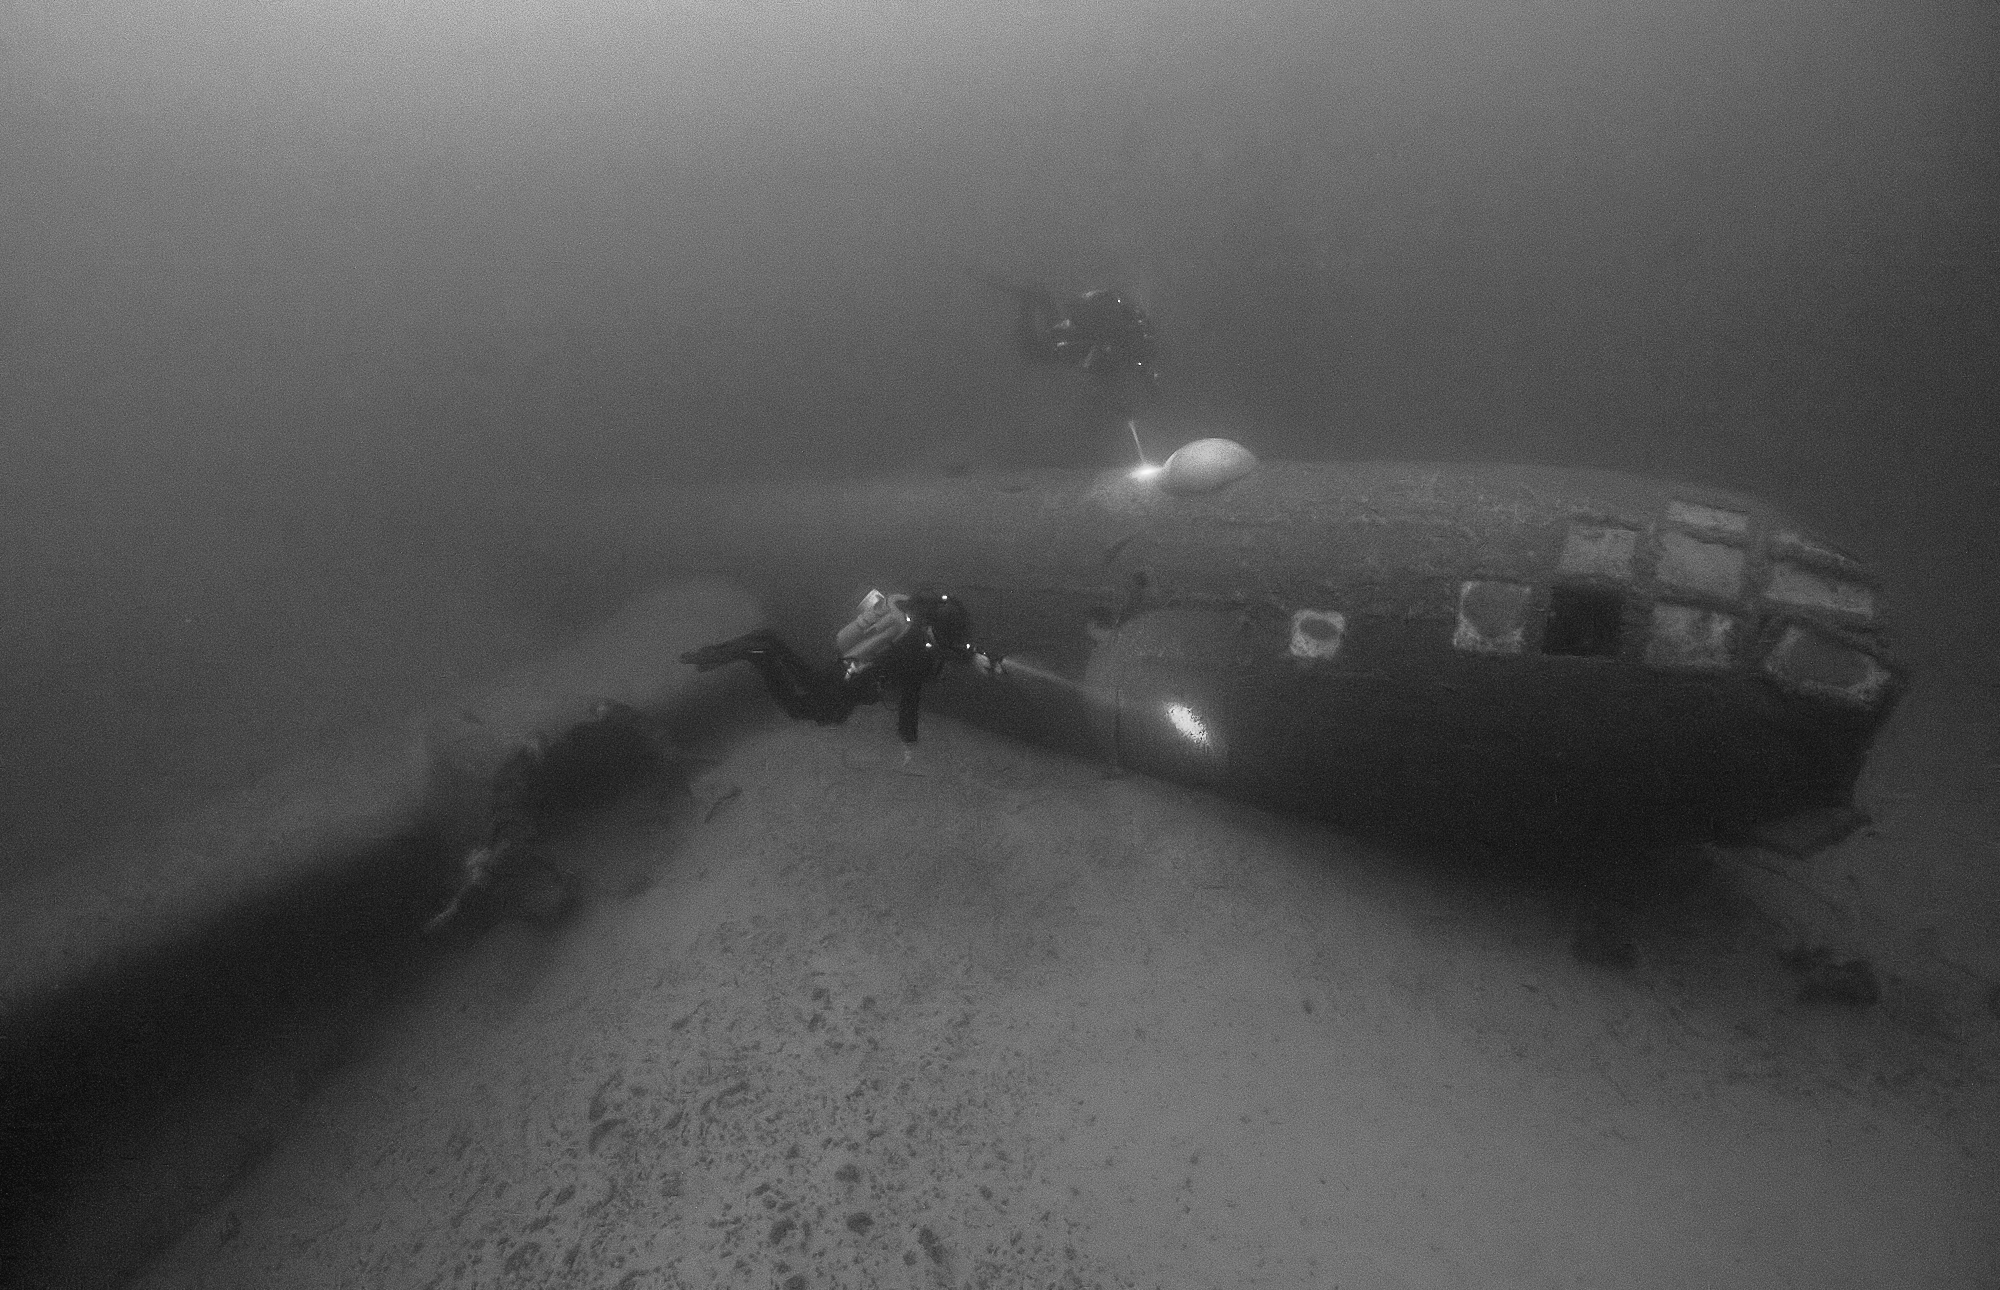 Divers inspect the wreck of the B-29 ( Image provided by Gregg Mikolasek - Director Undersea Voyager Project